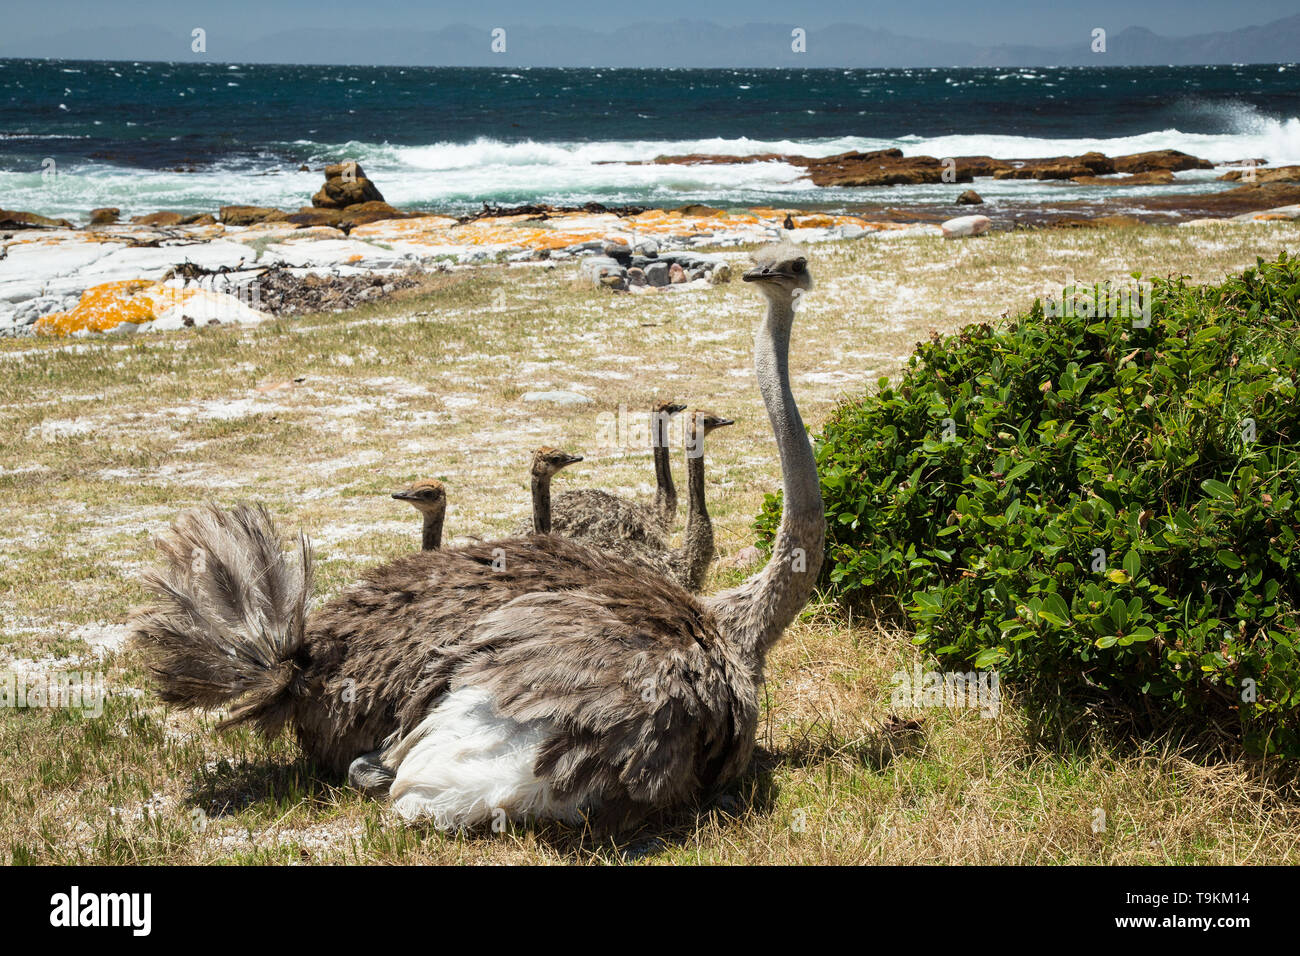 Wild ostriches on the Cape Peninsula at Cape Town, South Africa Stock Photo